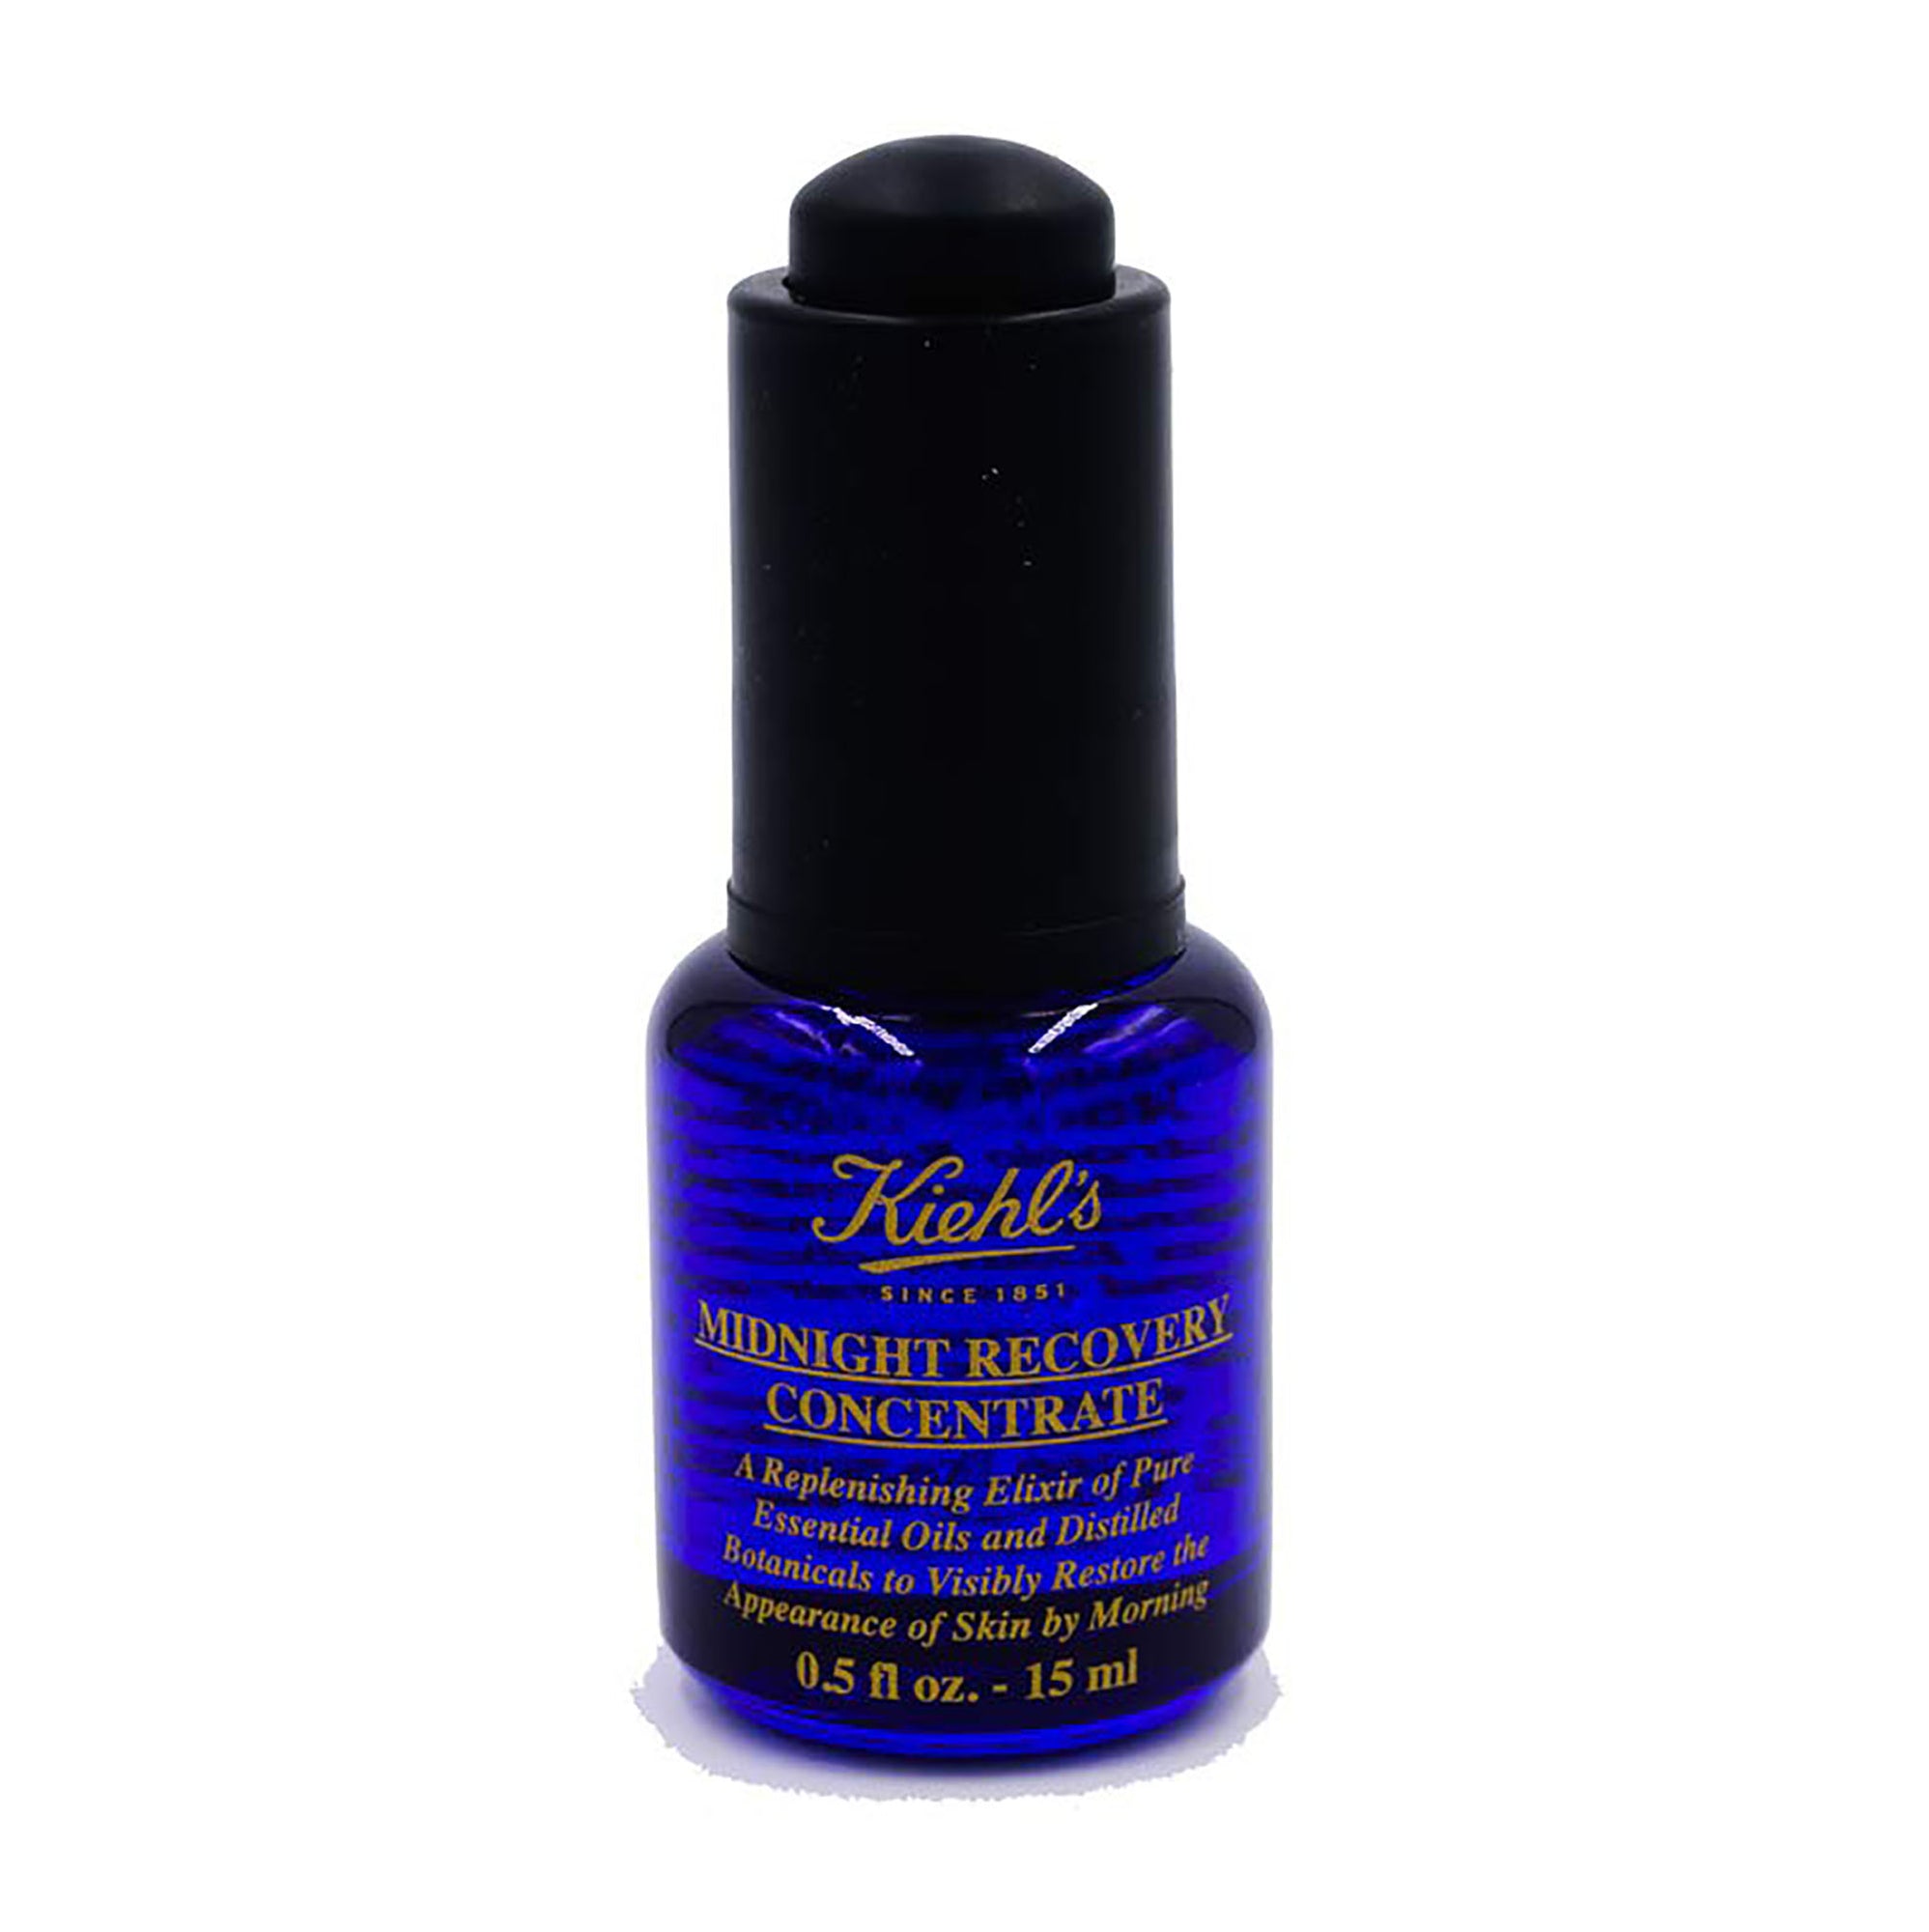 Kiehl's Midnight Recovery Concentrate Face Oil - 0.5oz / 15ML